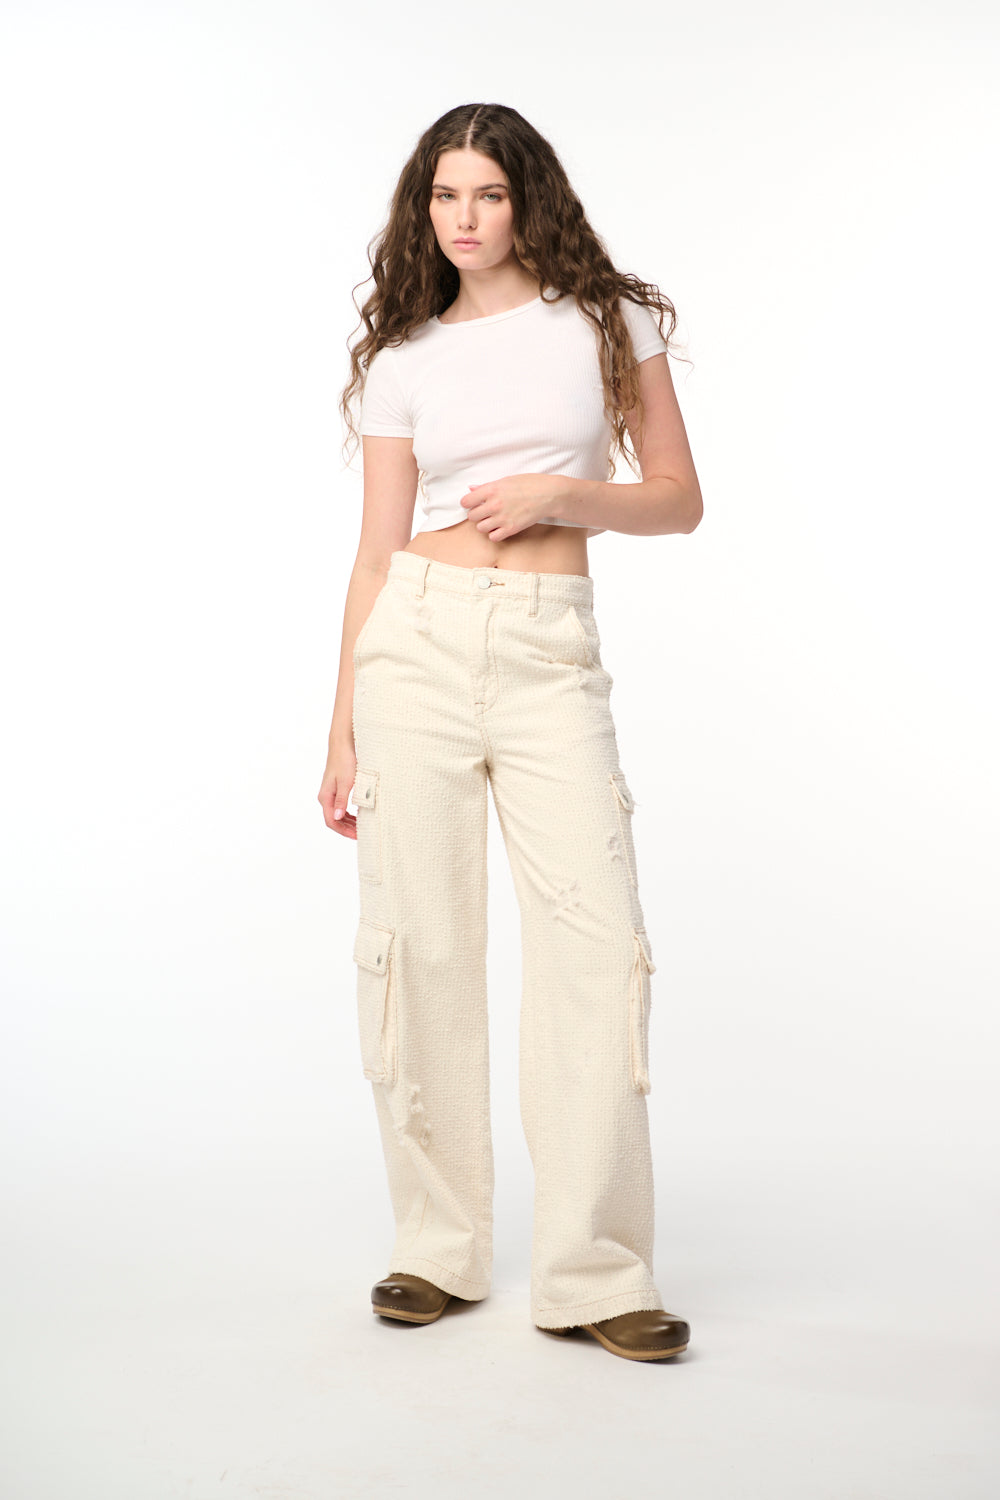 The Franklin In Vibe Out Pant